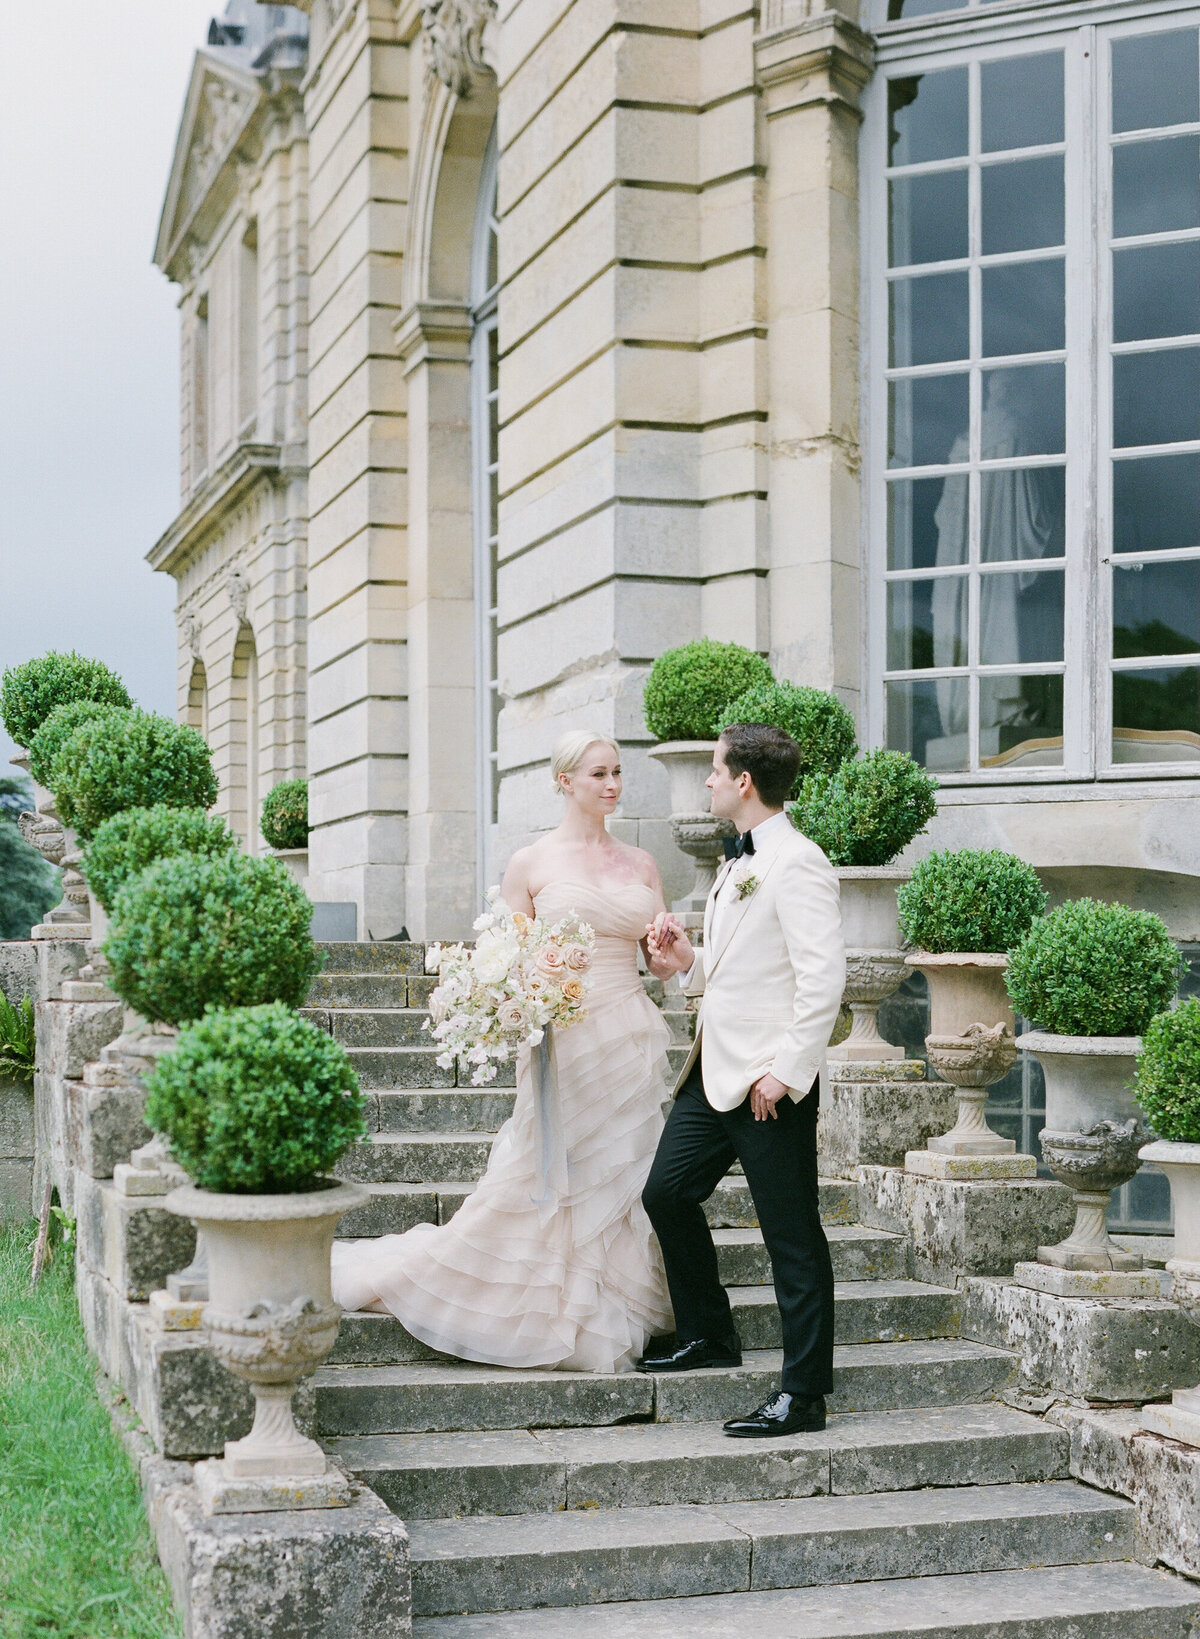 Jennifer Fox Weddings English speaking wedding planning & design agency in France crafting refined and bespoke weddings and celebrations Provence, Paris and destination Laurel-Chris-Chateau-de-Champlatreaux-Molly-Carr-Photography-56